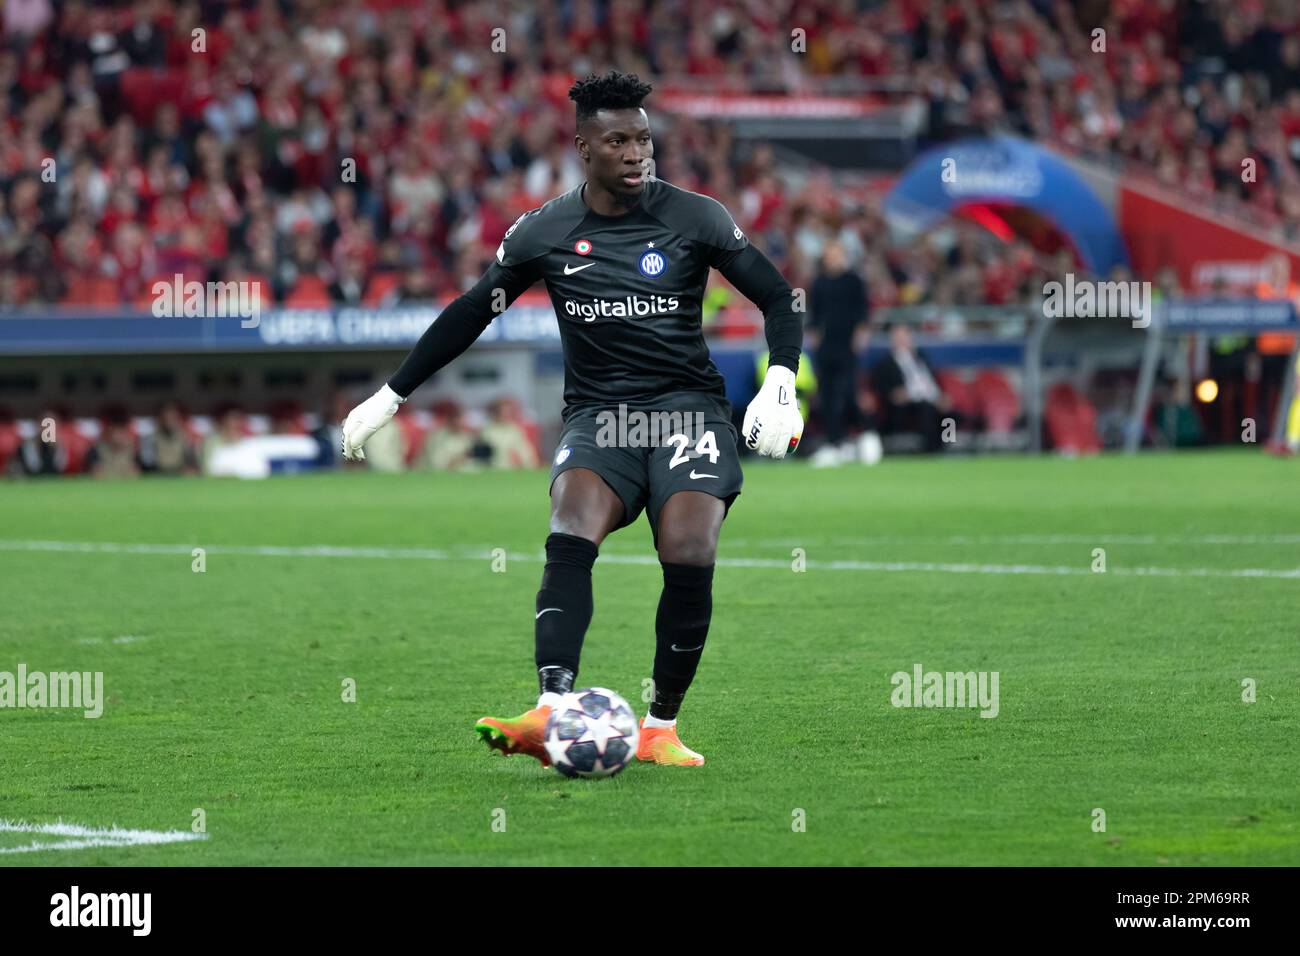 Lisbon, Portugal. 11th Apr, 2023. April 11, 2023. Lisbon, Portugal. Inter Milan's goalkeeper from Cameroon Andre Onana (24) in action during the game of the 1st Leg of the Quarter-Finals for the UEFA Champions League, Benfica vs Inter Milan Credit: Alexandre de Sousa/Alamy Live News Stock Photo